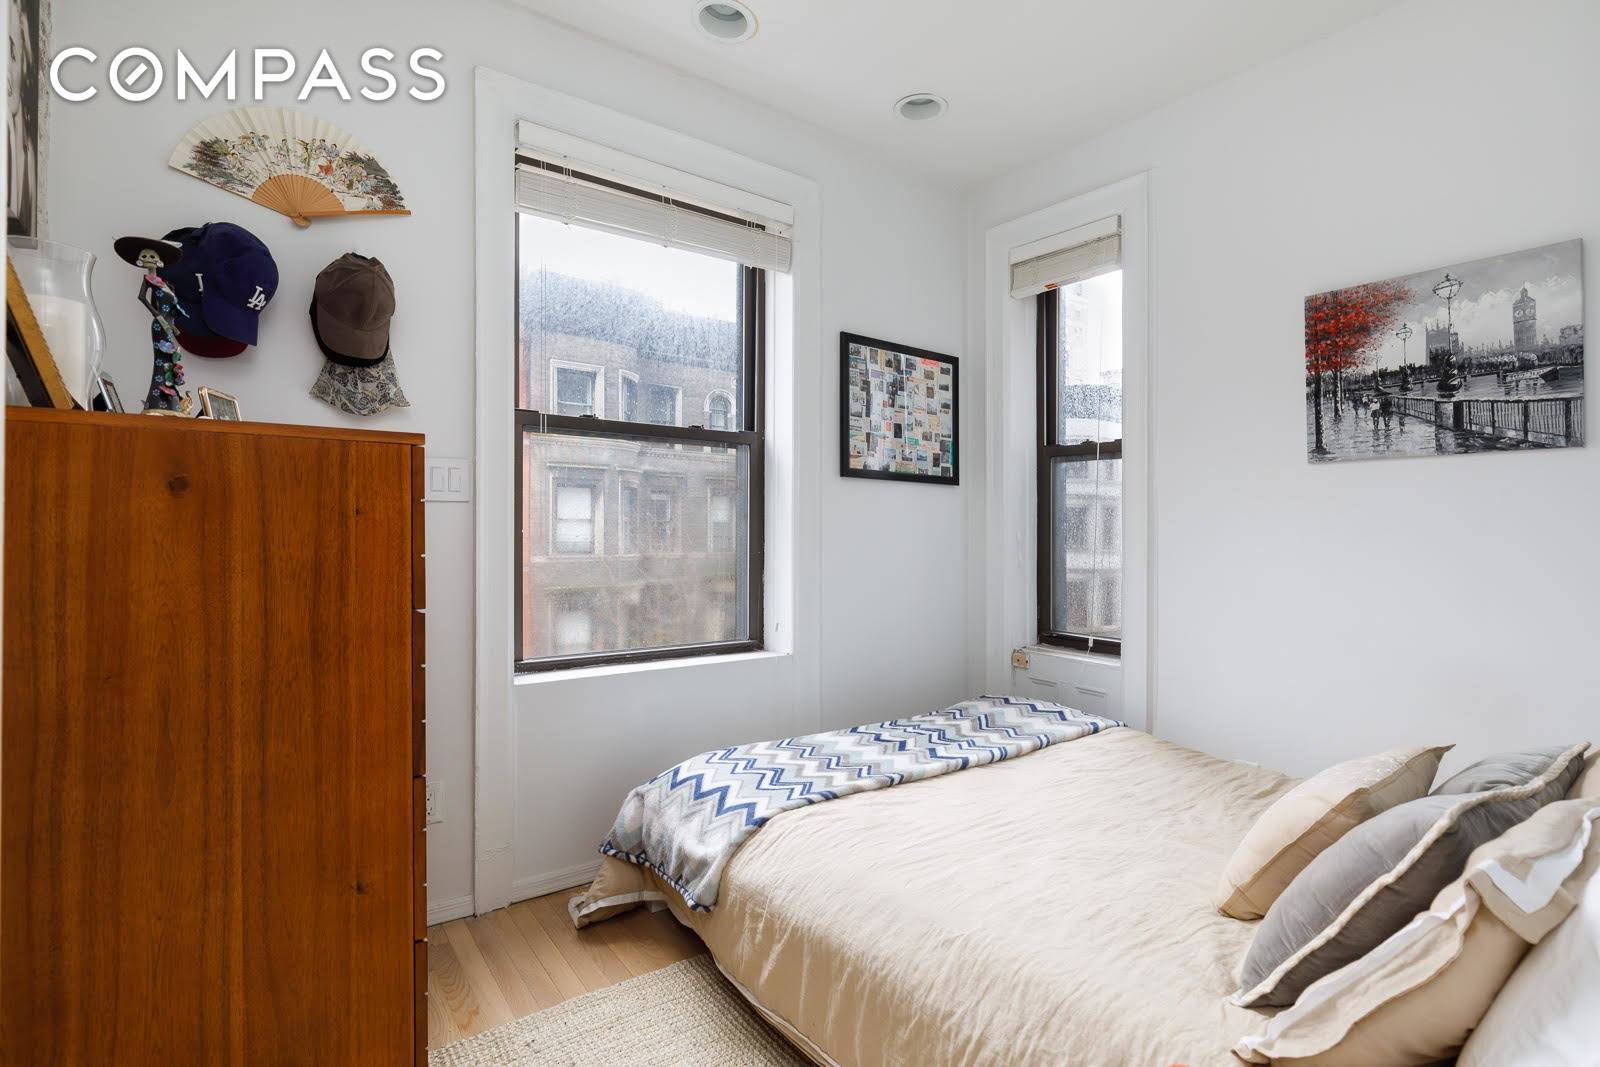 Perfectly located steps from Riverside Park in an authentic prewar restored townhouse, these architectural details are not to be missed the moment you step into your new home.